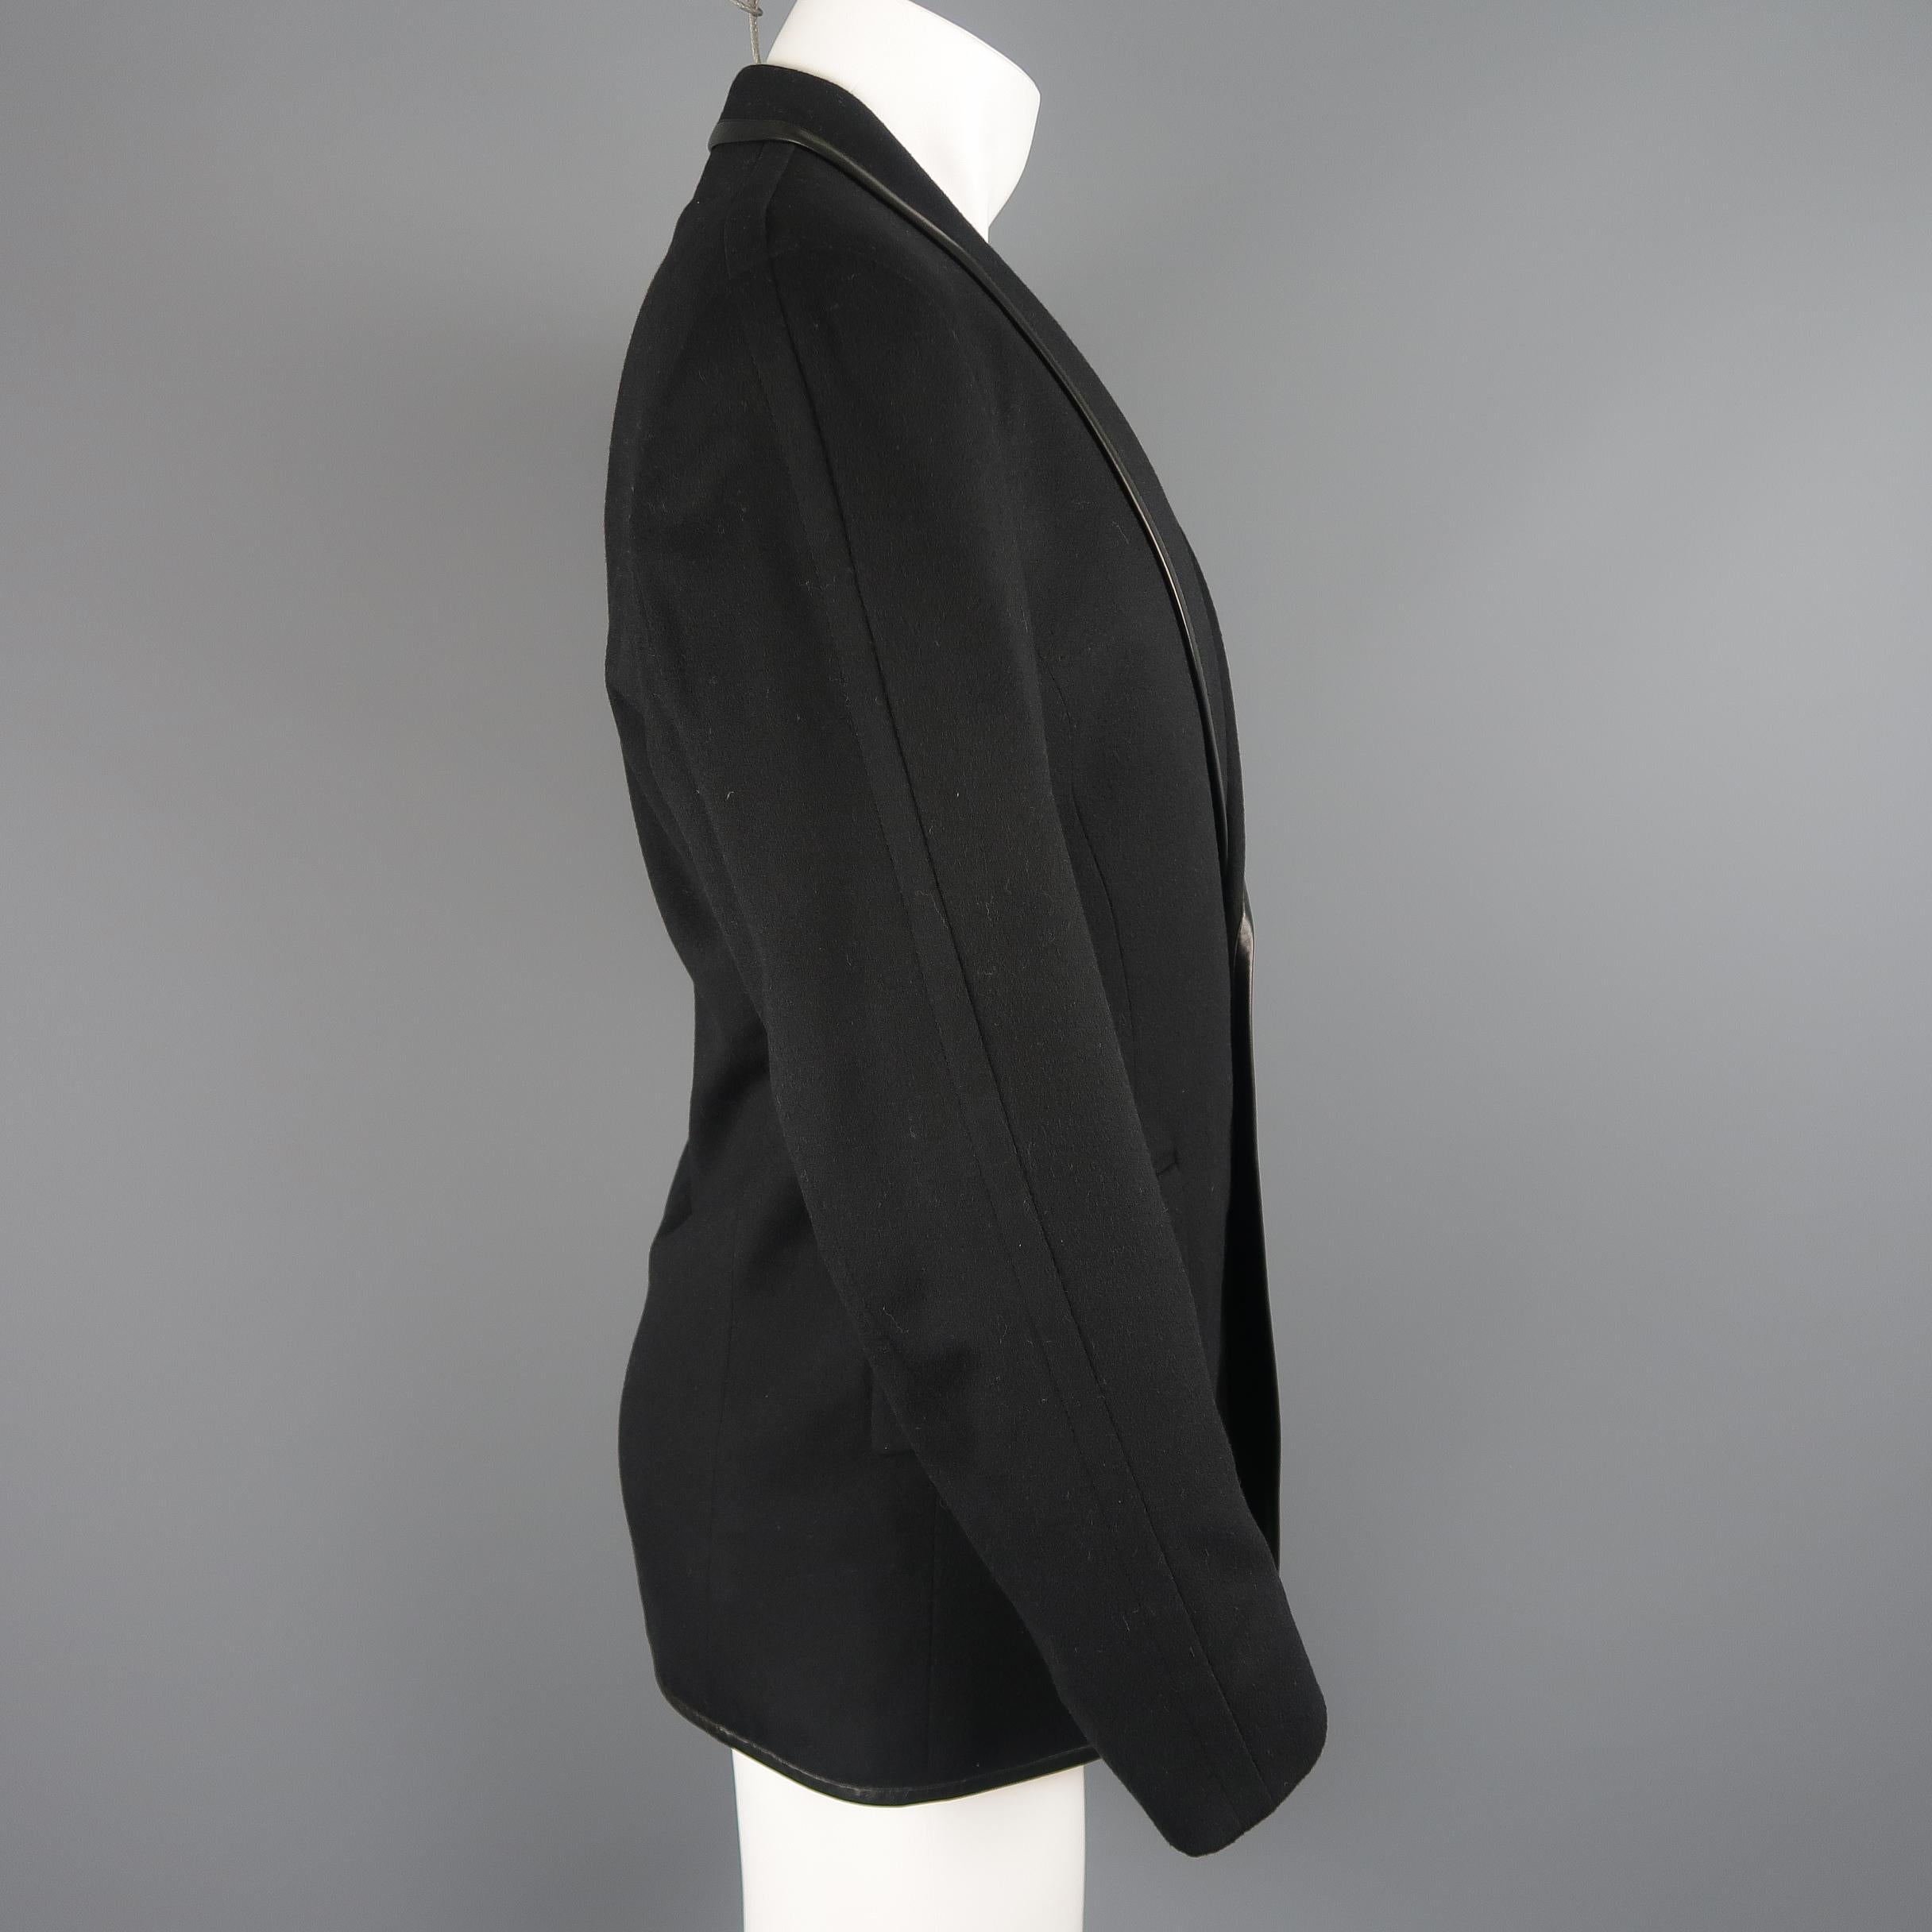 Thierry Mugler Black Wool / Cashmere Leather Trimmed Shawl Collar Sport Coat 1